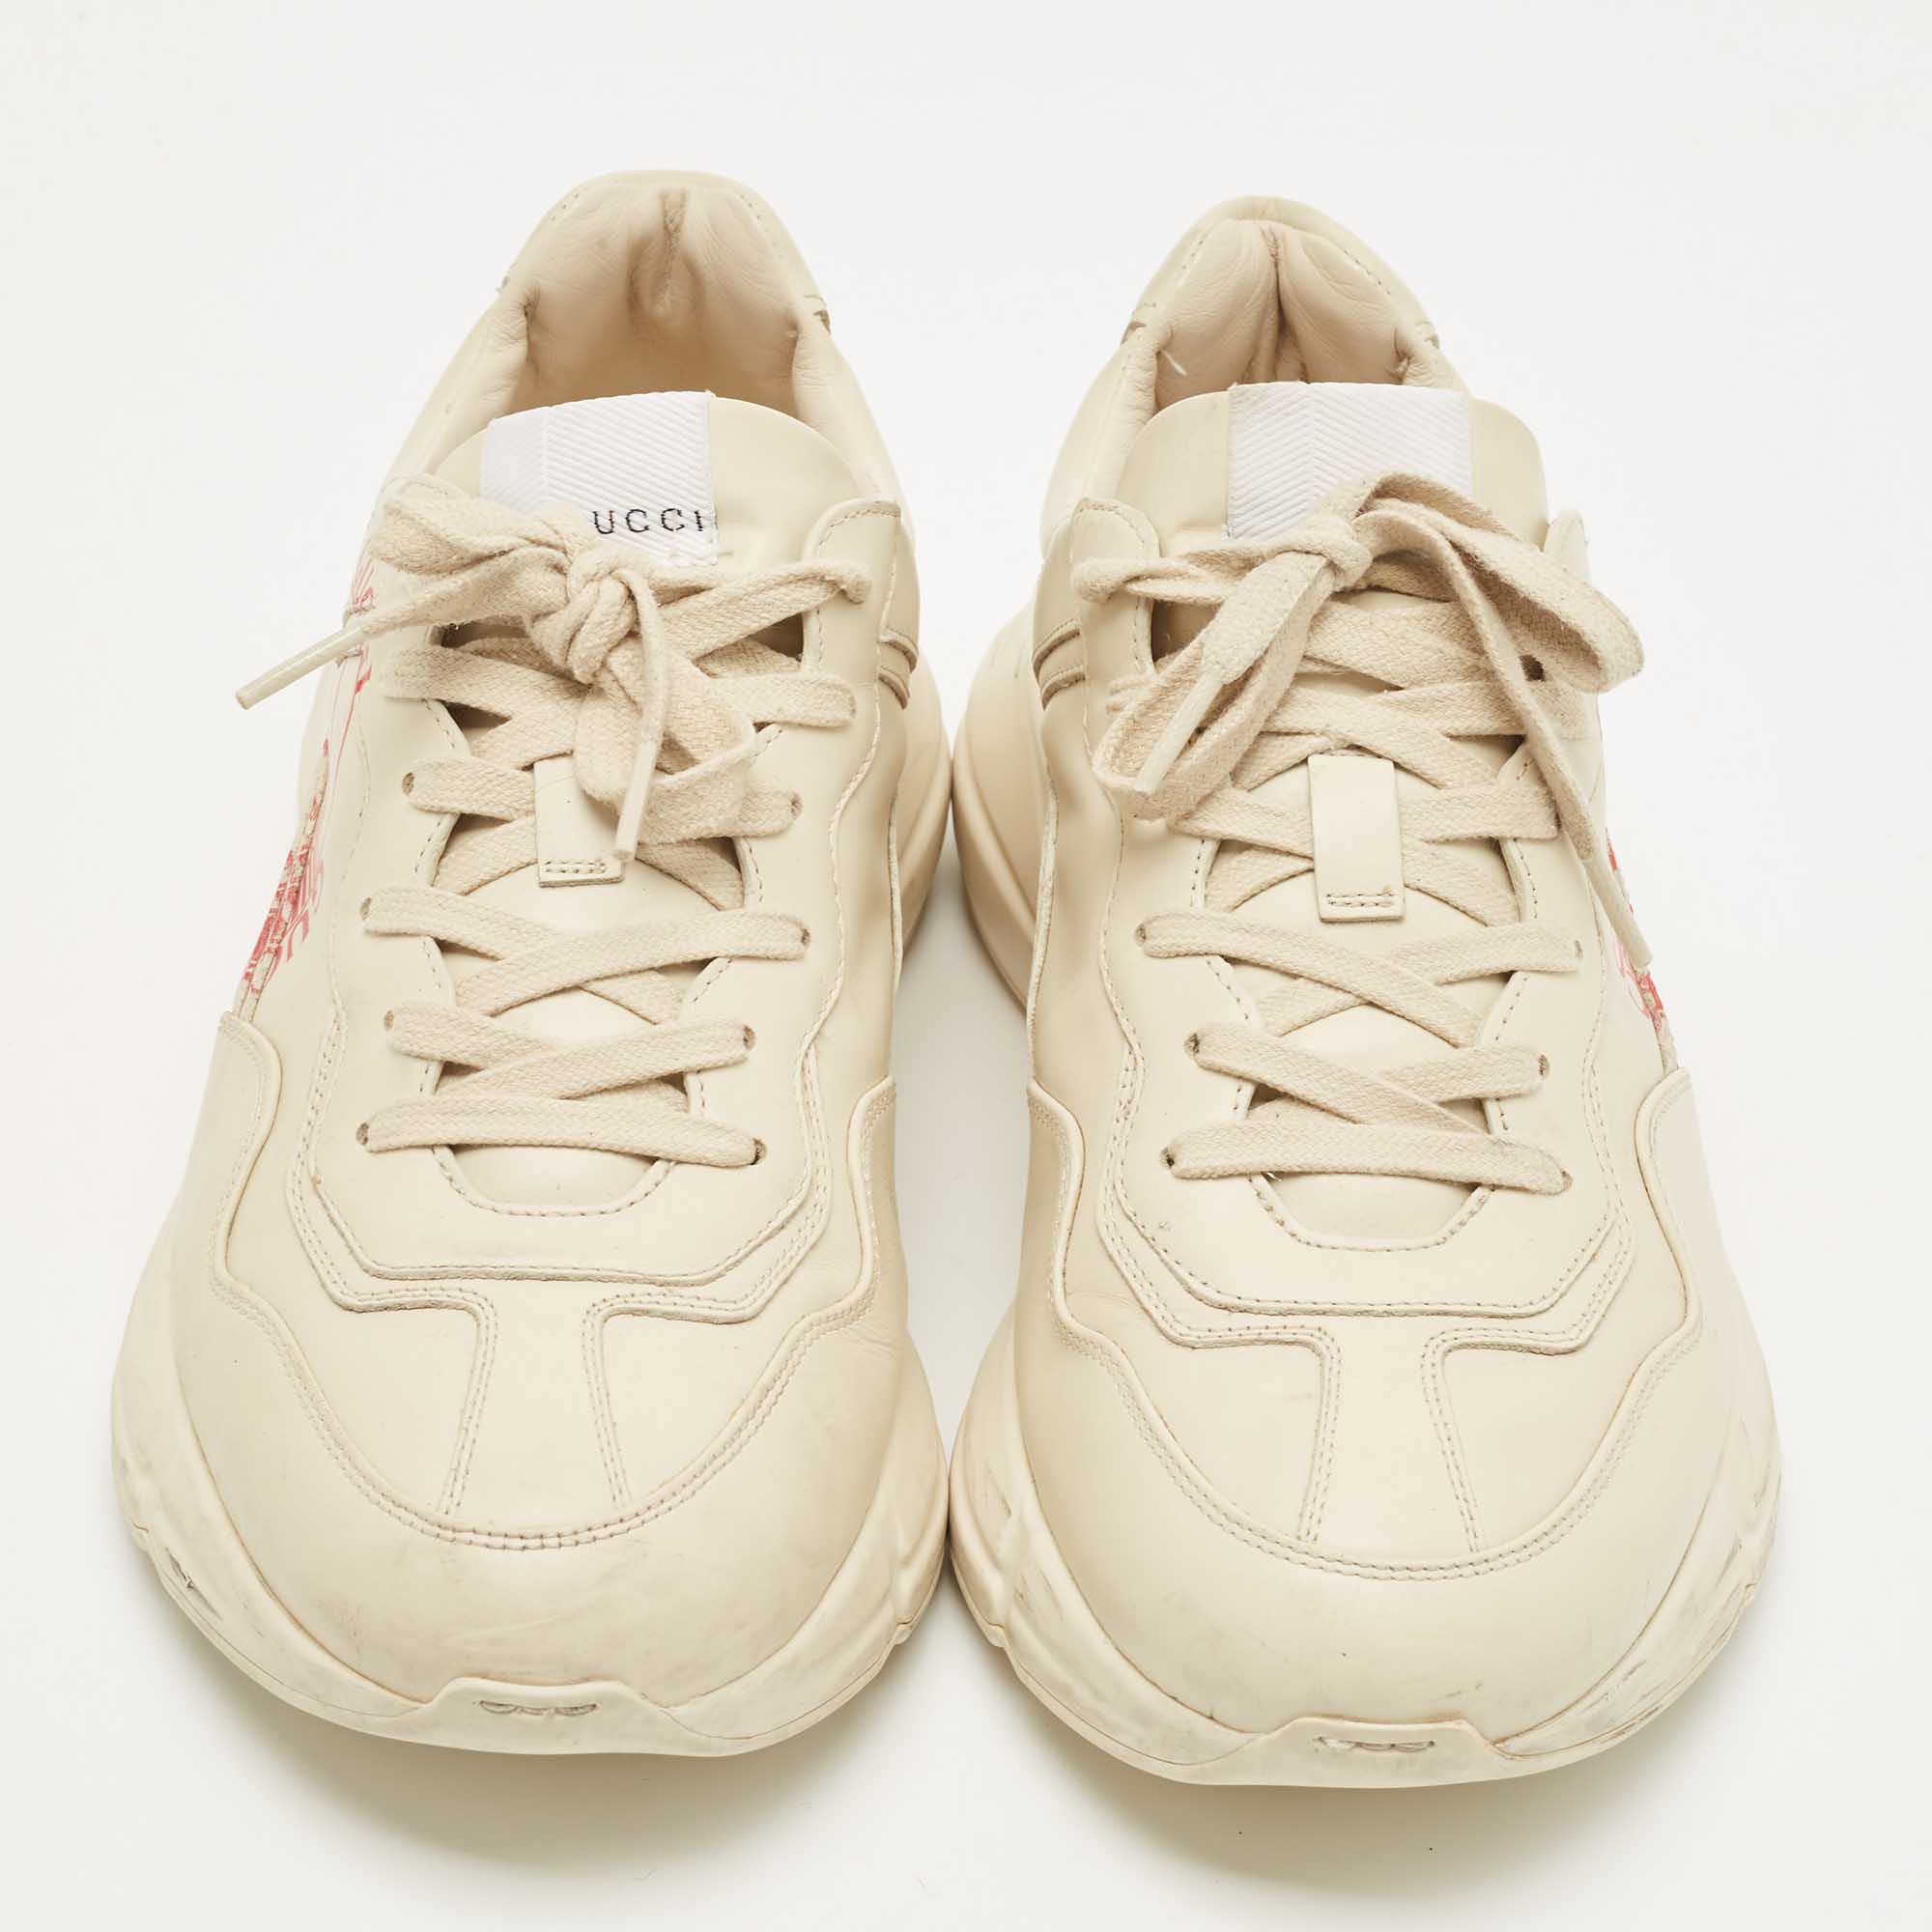 Gucci Cream Leather Disk Rhyton Sneakers Size 42